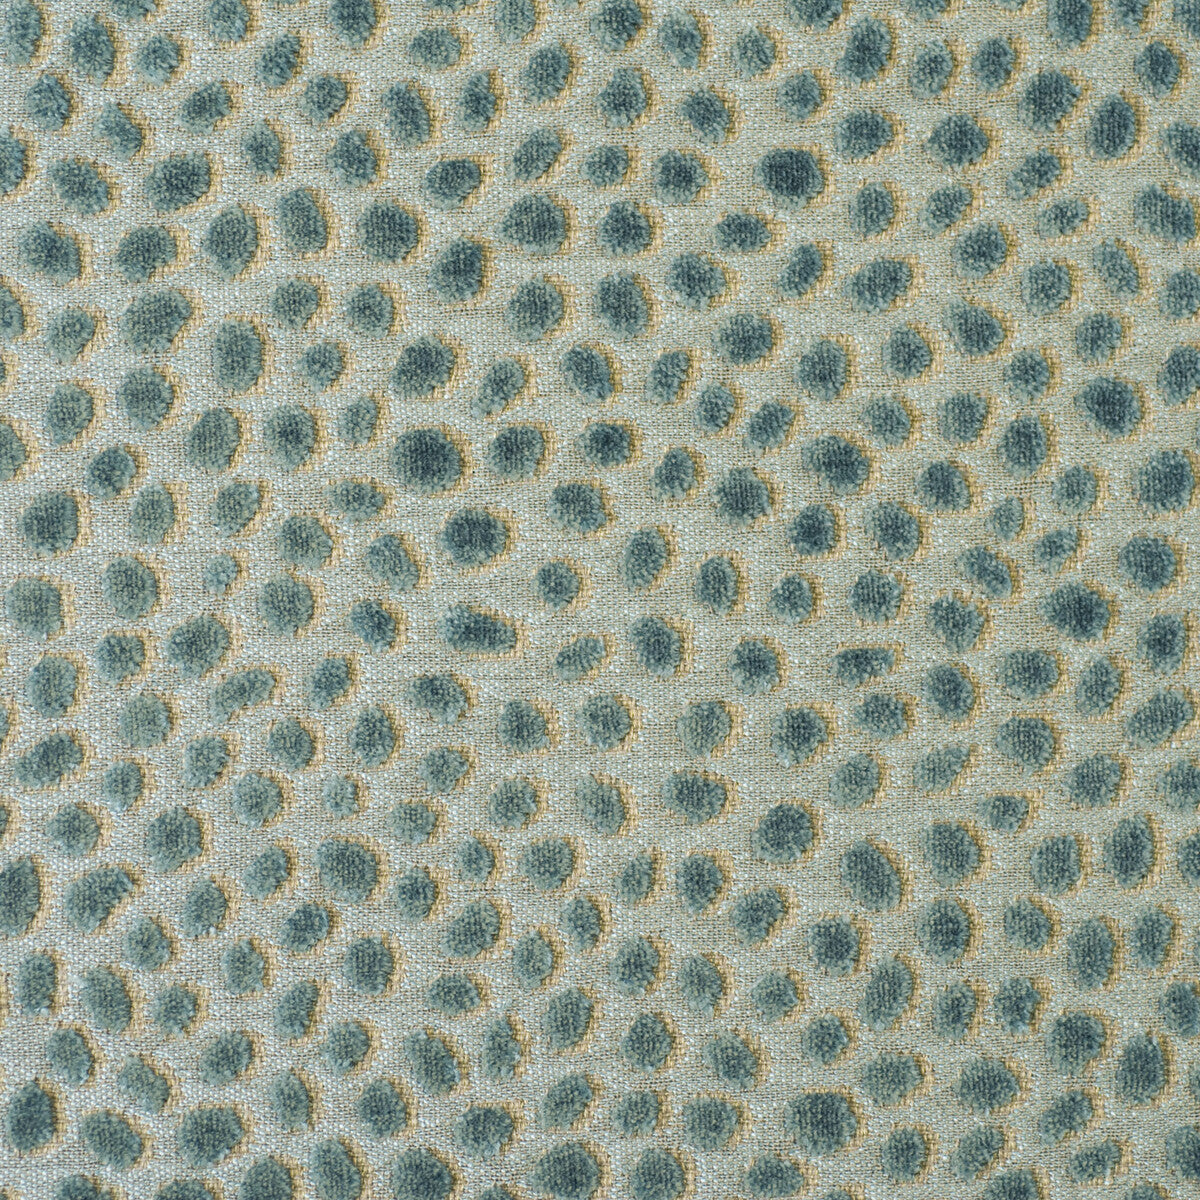 Cosma fabric in teal/aqua color - pattern PF50064.615.0 - by Baker Lifestyle in the Foxwood collection